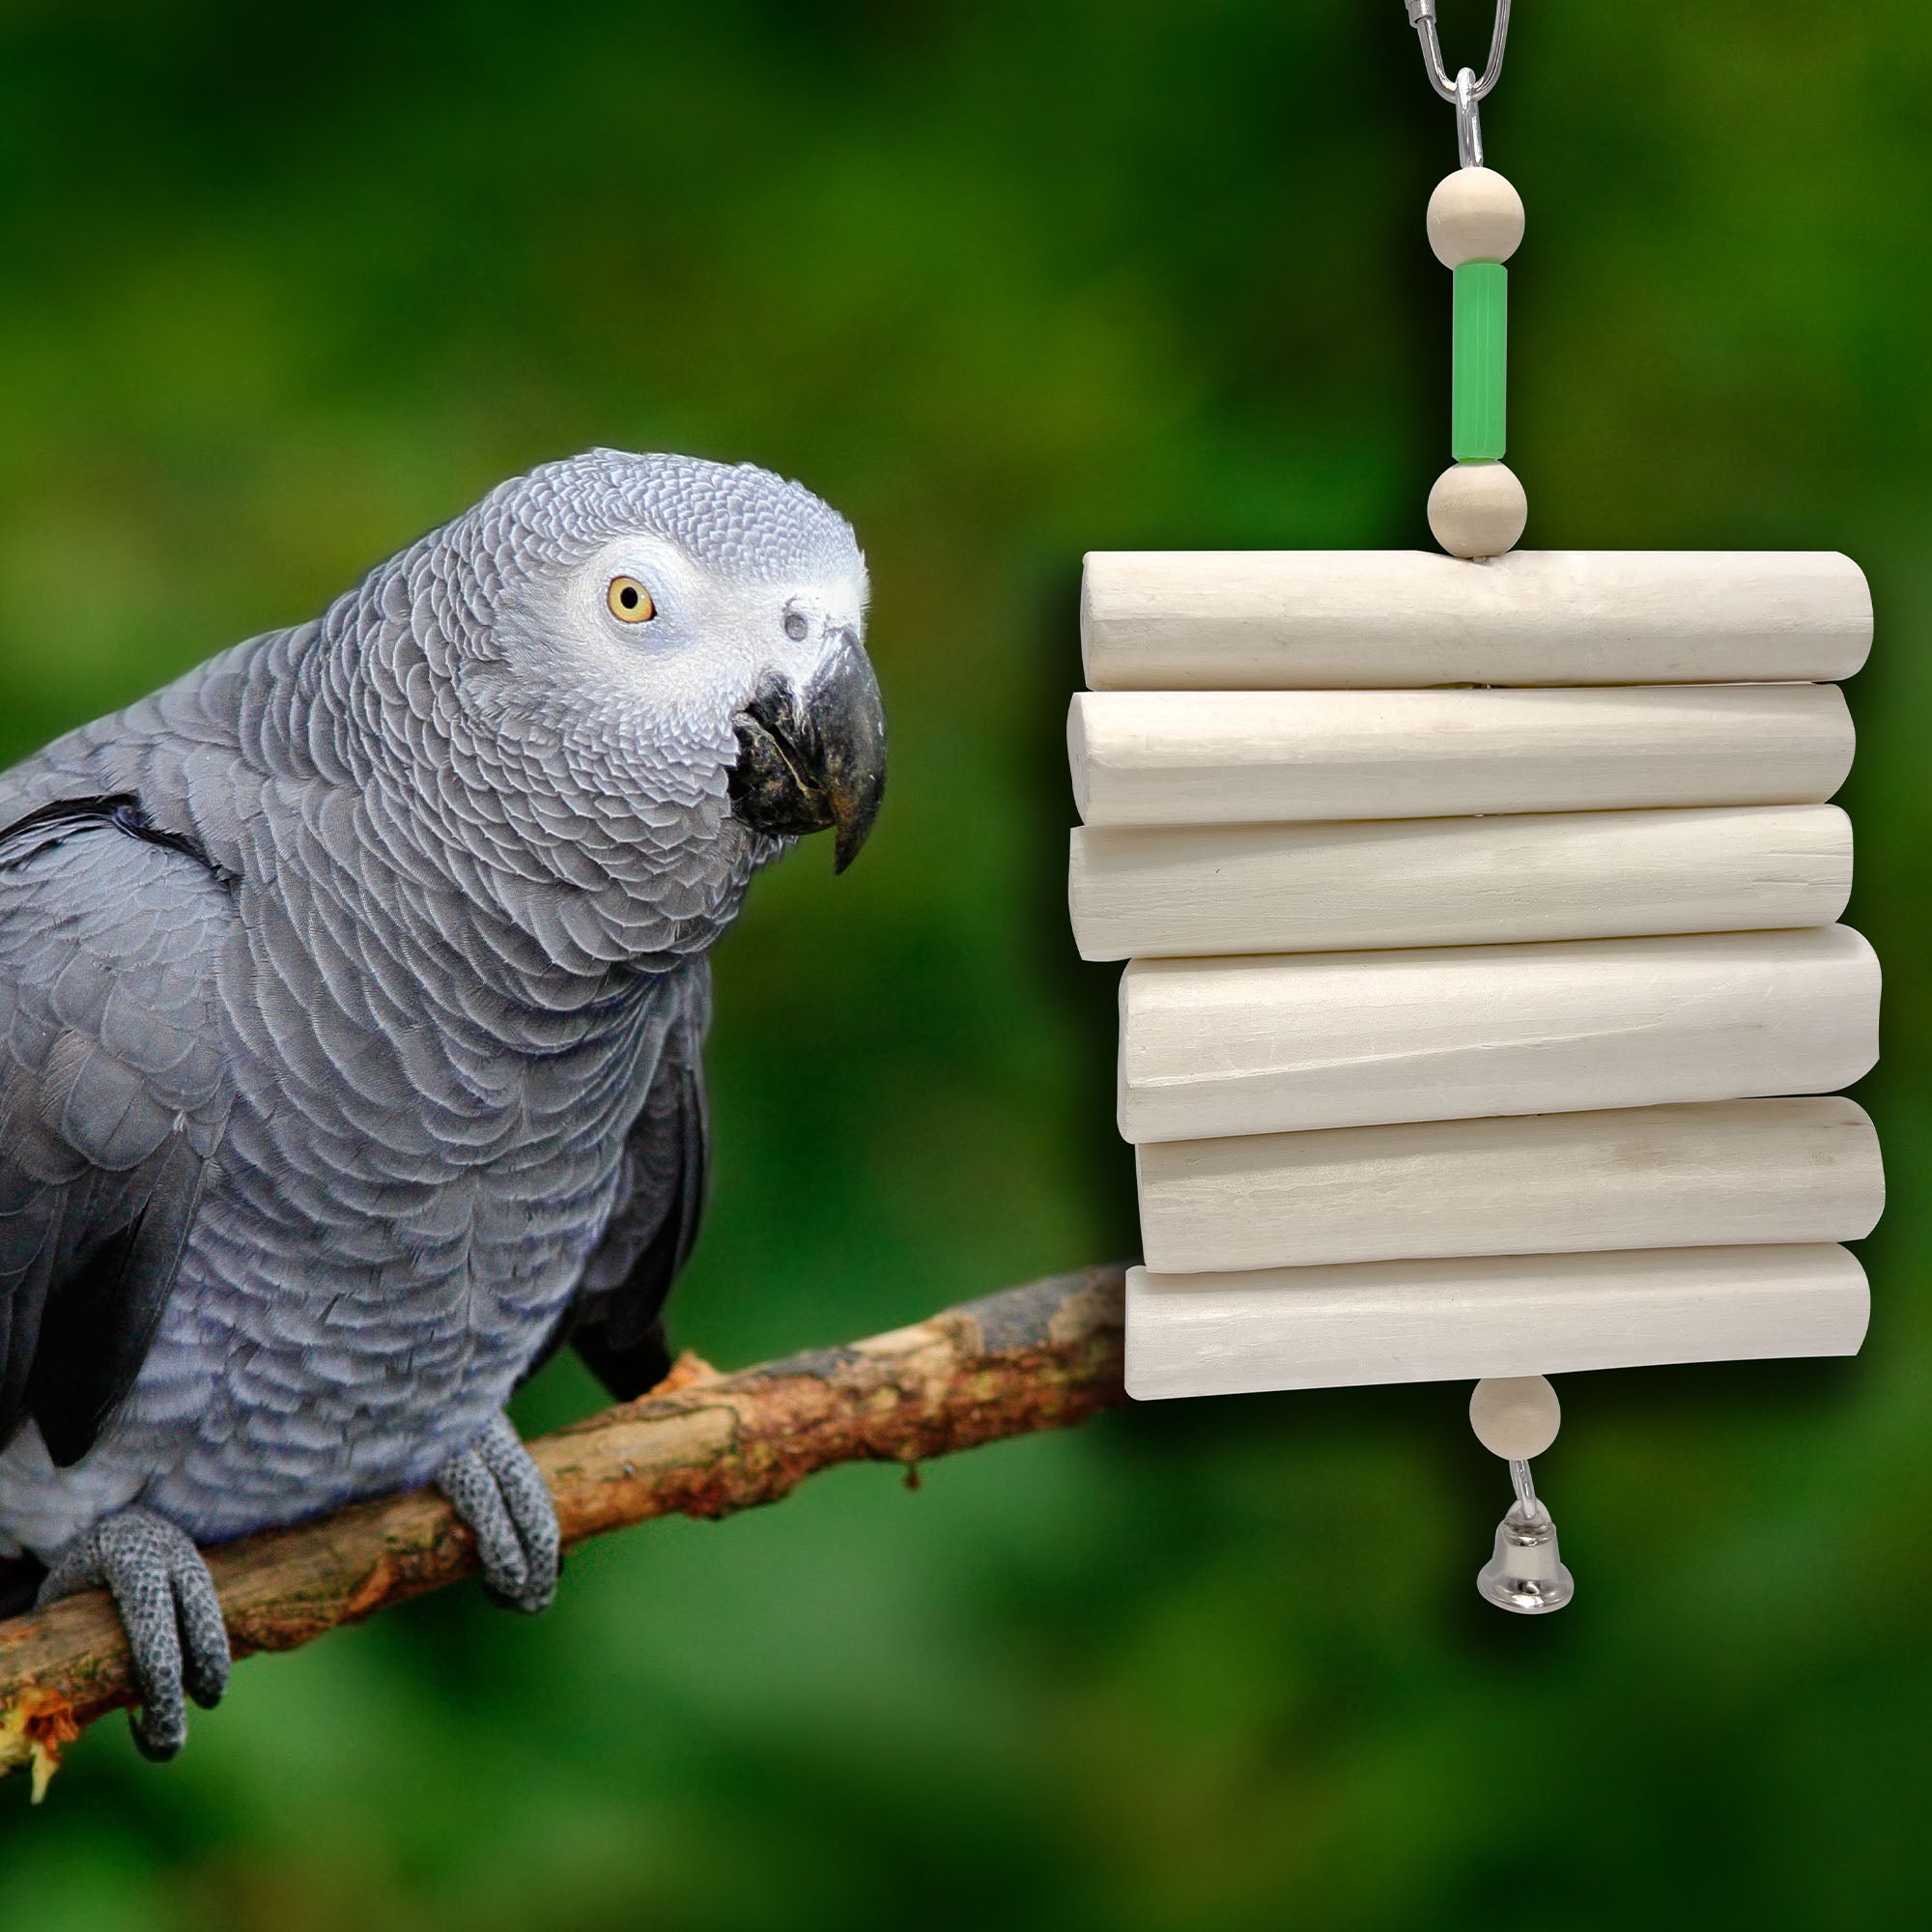 What is a sola snow cone bird toy?